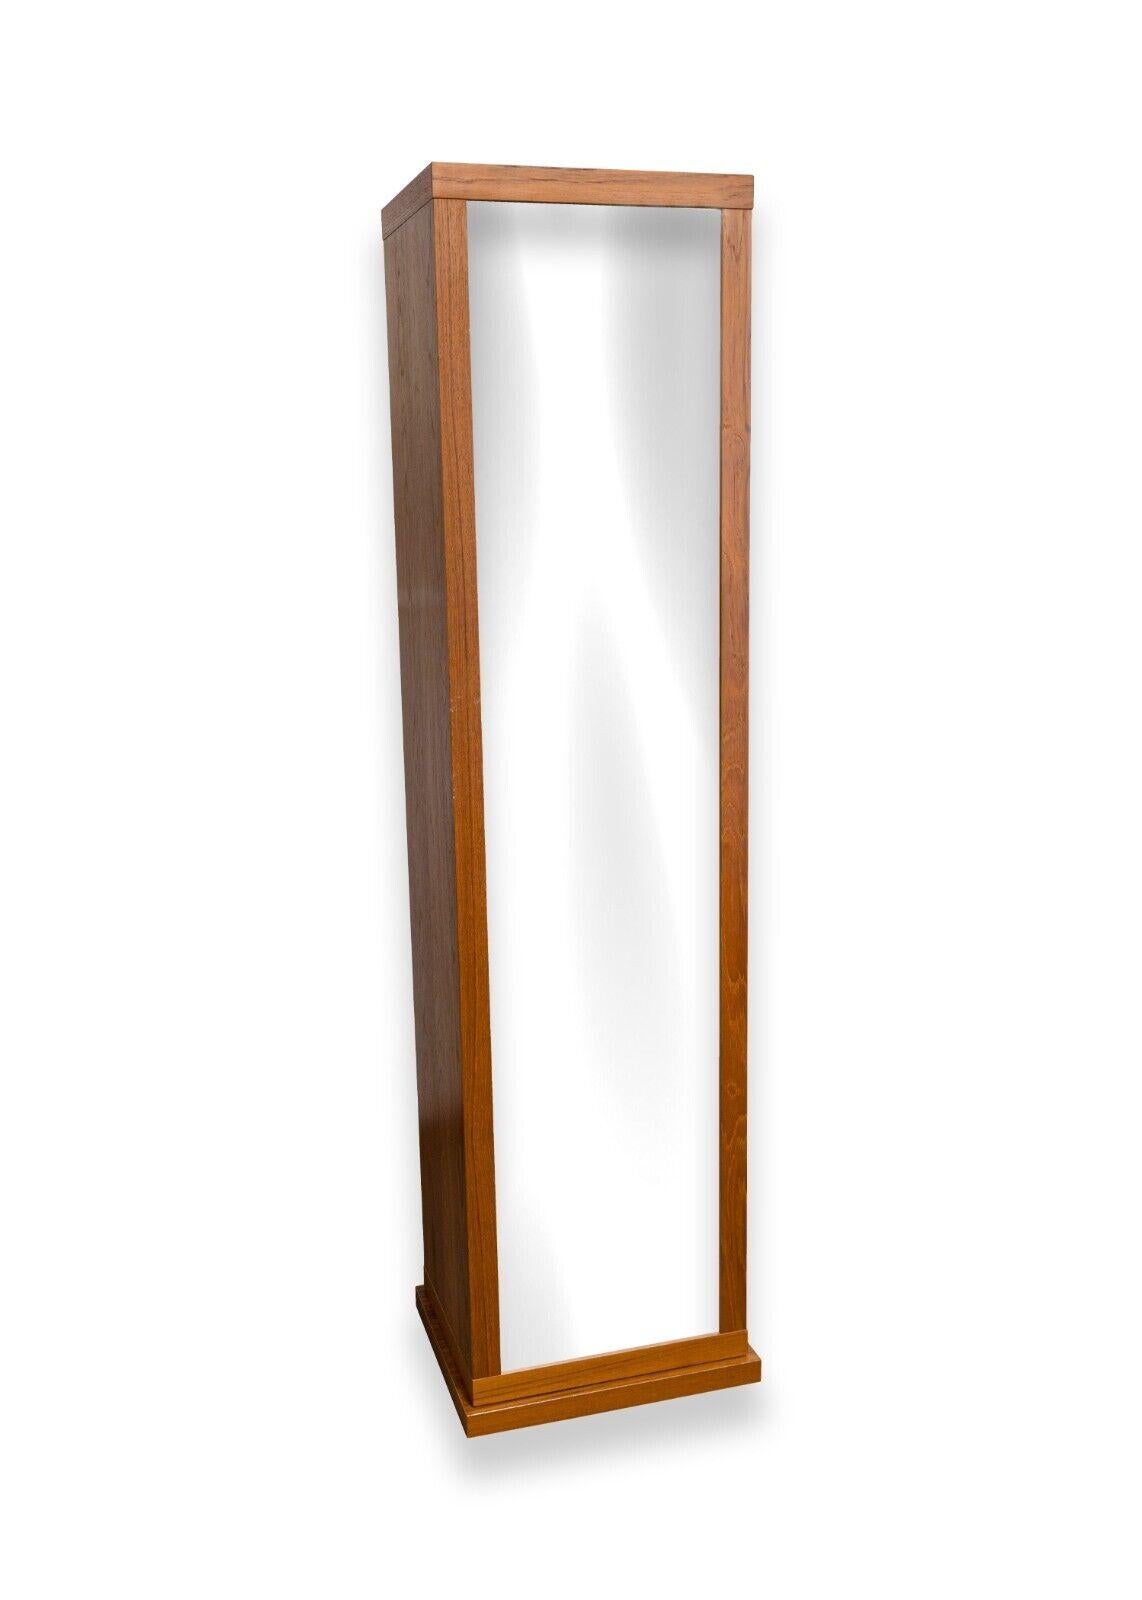 A Danish teak wood rotating bookshelf with full body mirror. A gorgeous piece of Danish furniture. This piece features a unique rotating design with 4 shelves and a center pull out drawer on one side, and a full length body mirror on the other. This